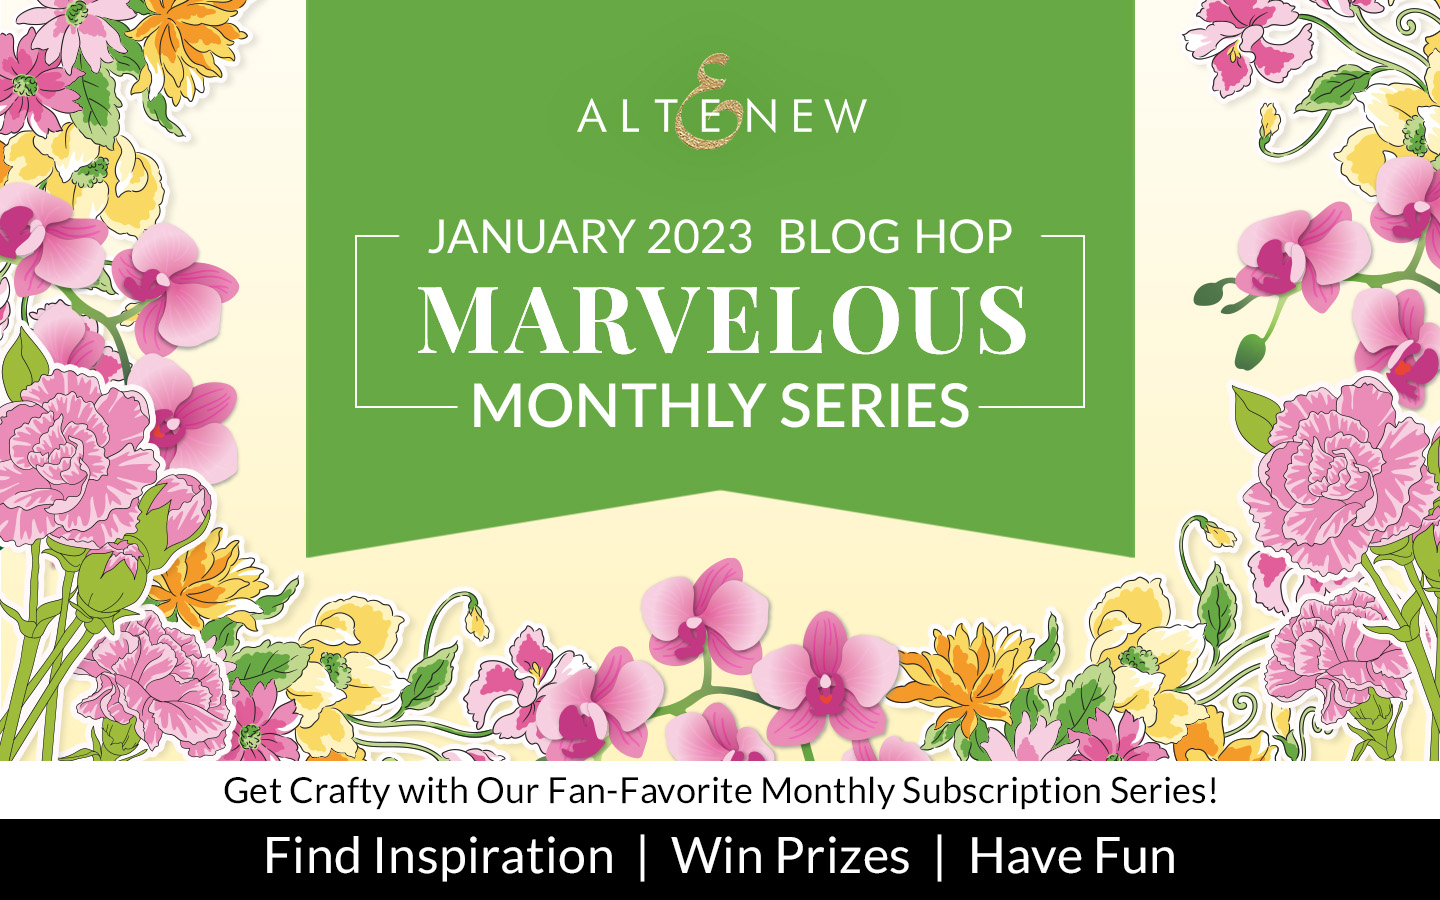 Altenew January 2023 Marvelous Monthly Series Release Blog Hop + Giveaway ($300 in Total Prizes!)